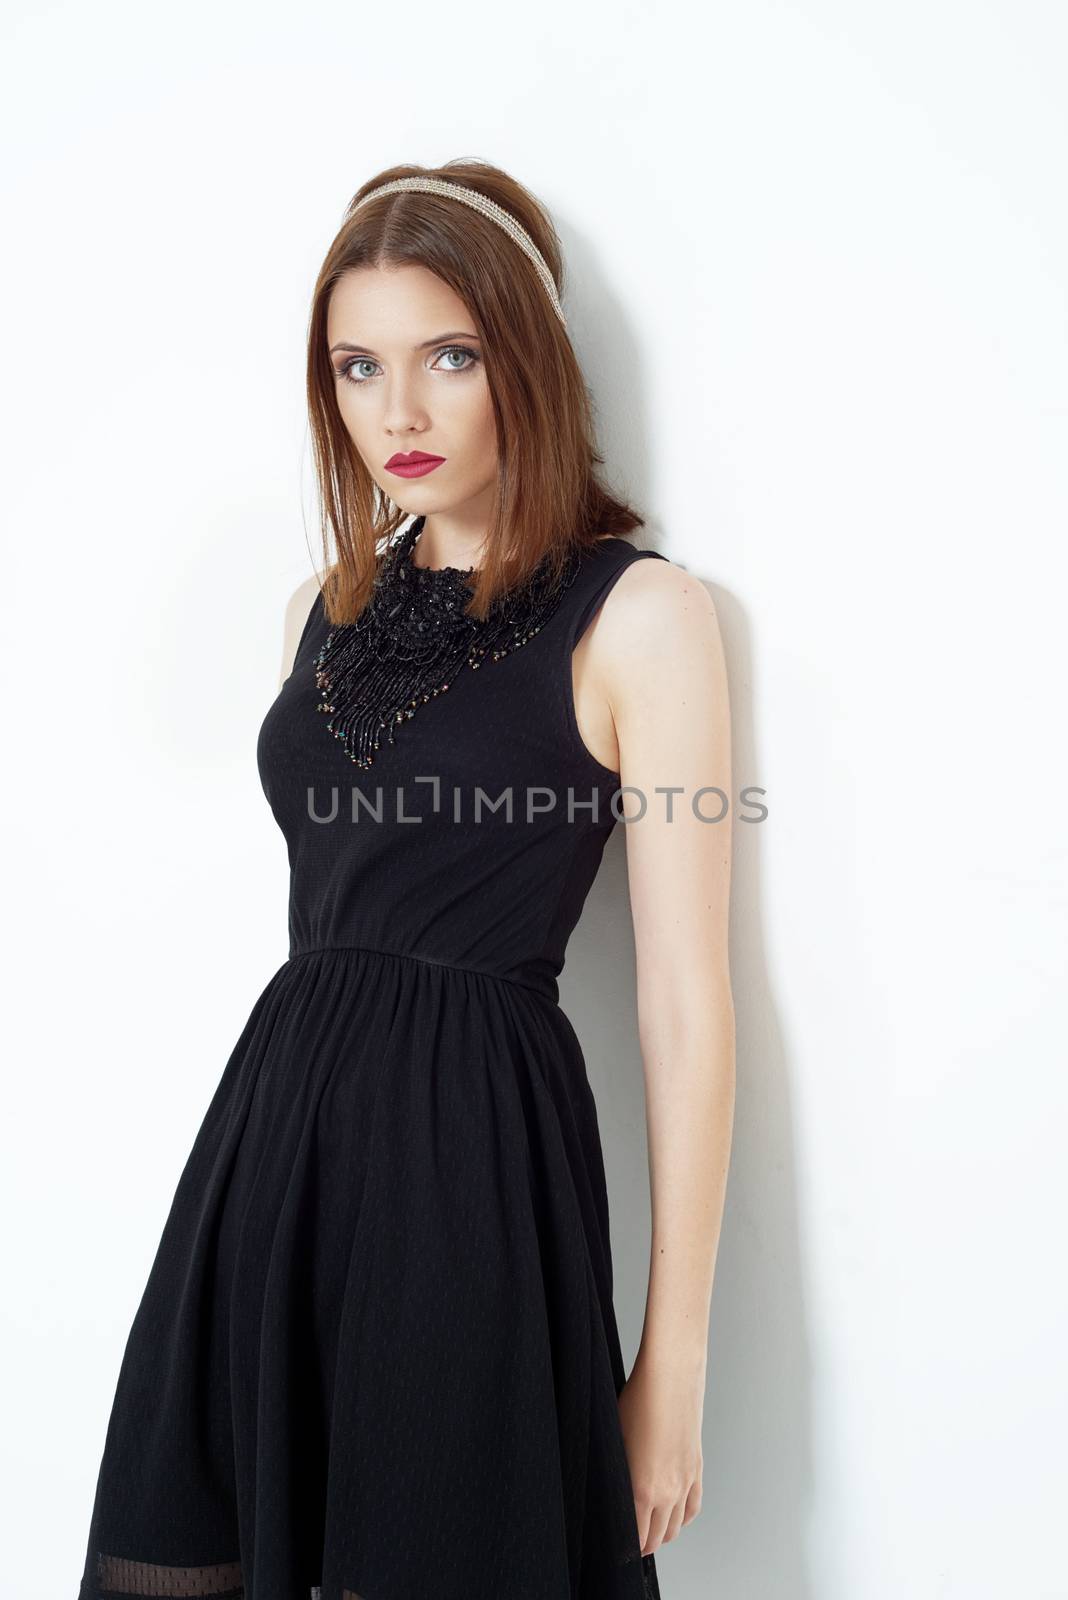 Fashion photo of young magnificent woman. Girl posing. Studio photo